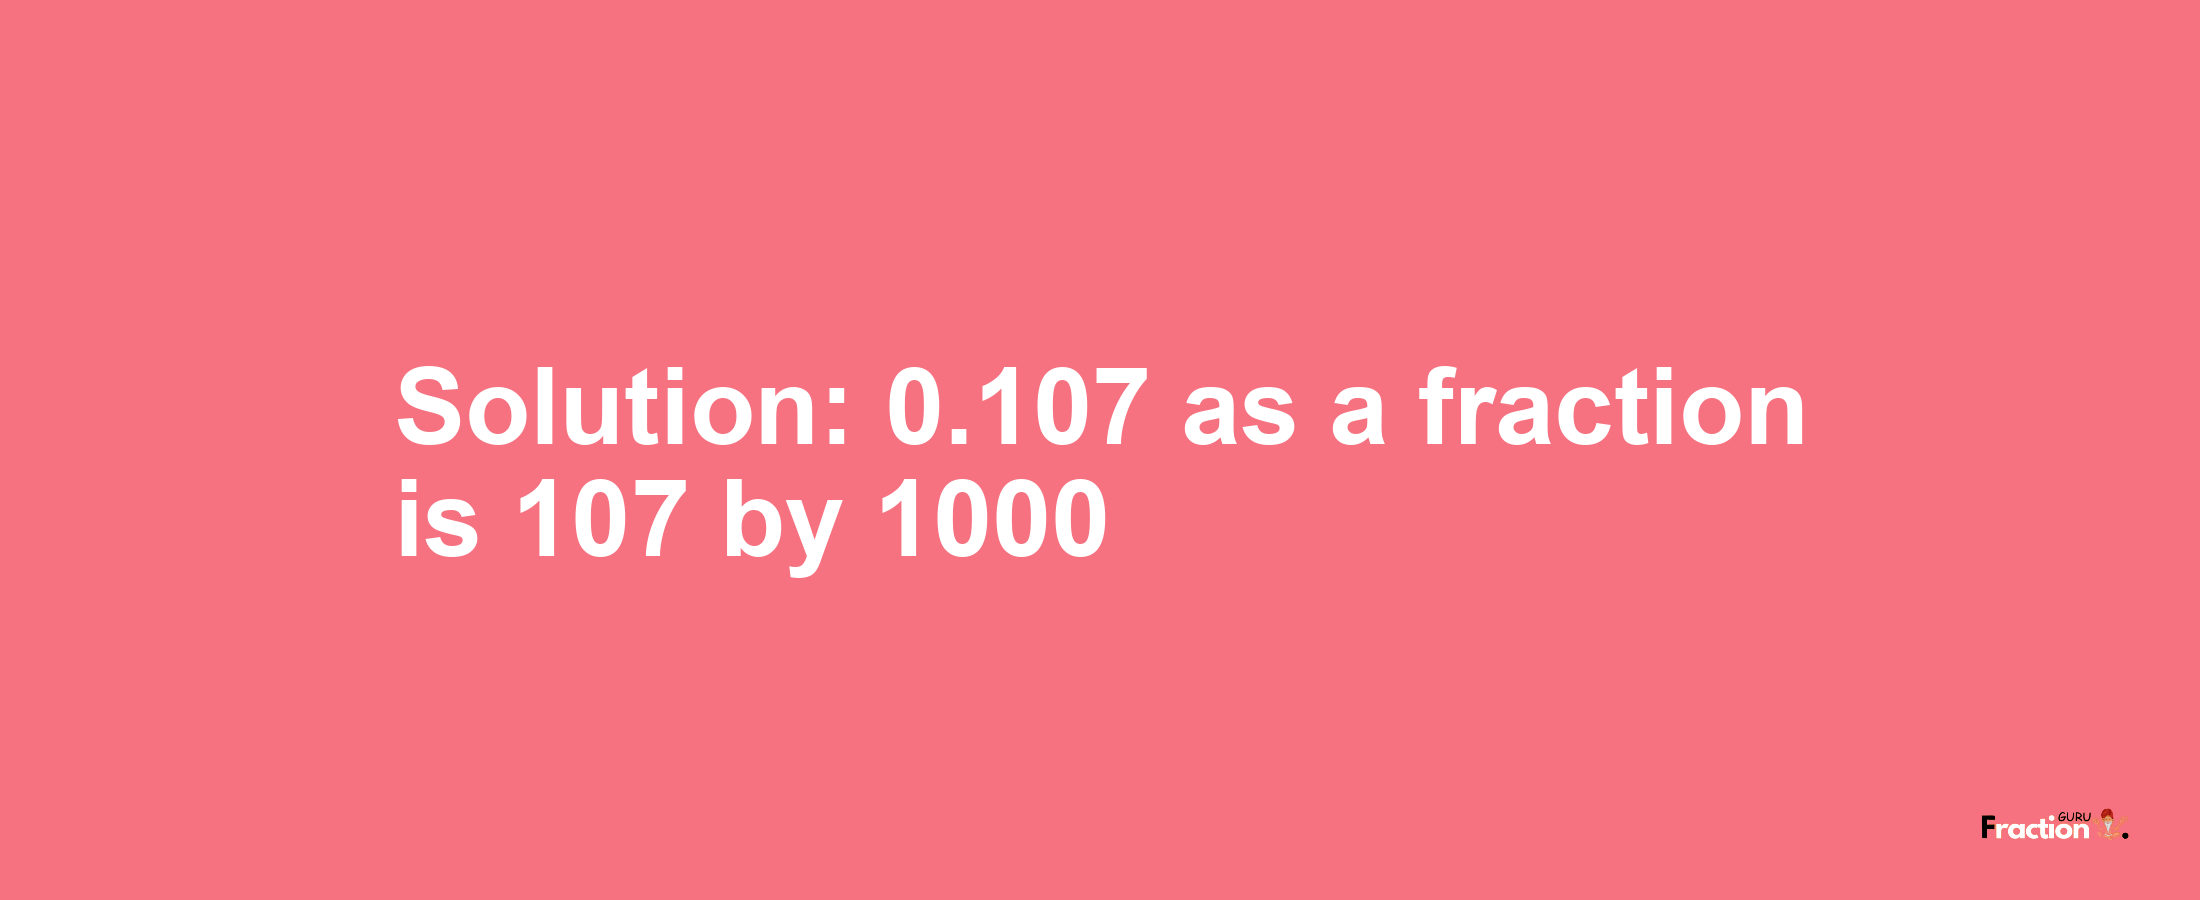 Solution:0.107 as a fraction is 107/1000